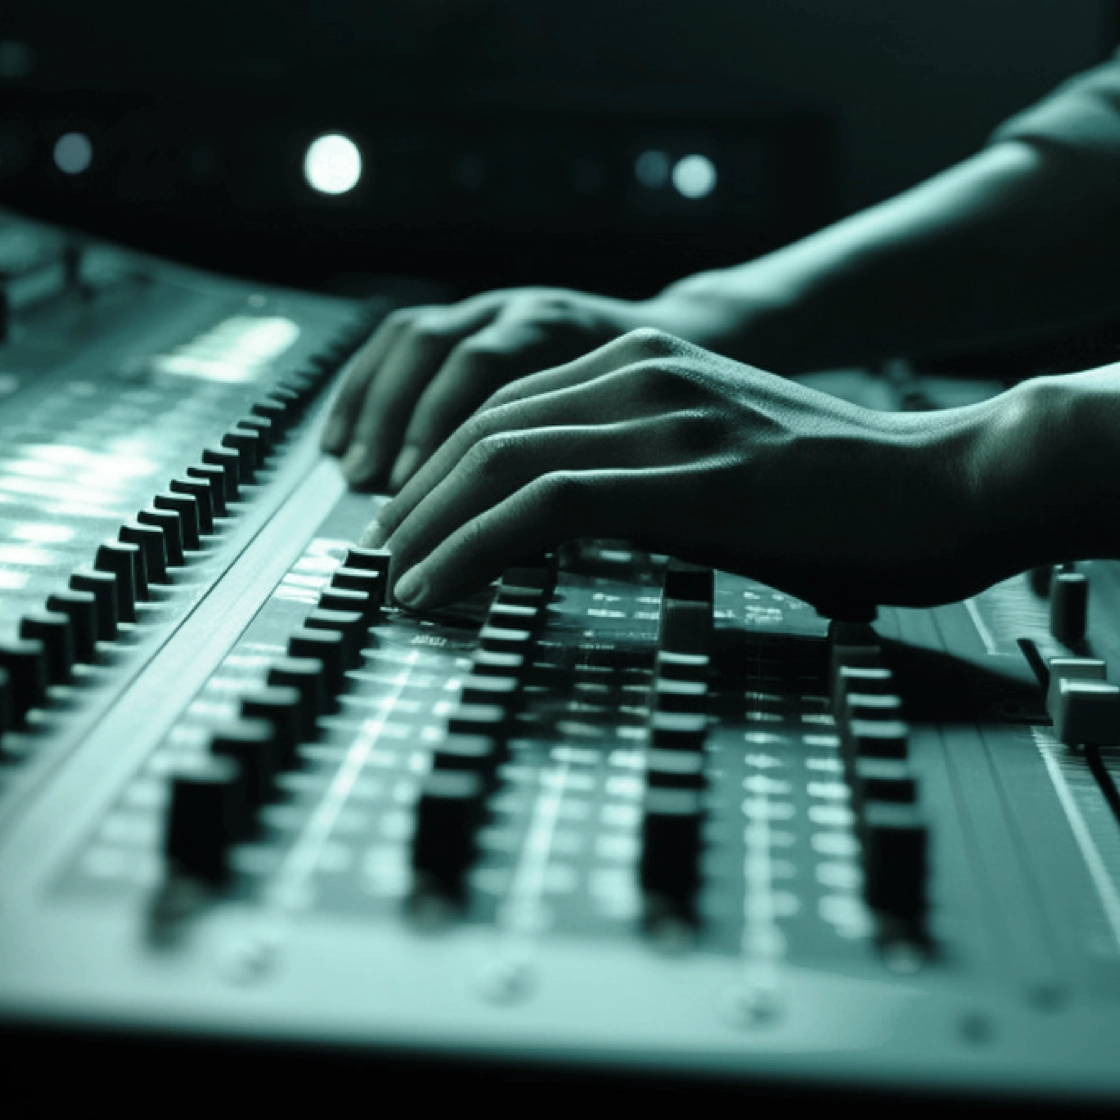 A pair of hands adjusts knobs and sliders on an audio mixing console. The image features a close-up view of the console, illuminated by soft, focused lighting, highlighting the details of the control panel and the hands operating it.